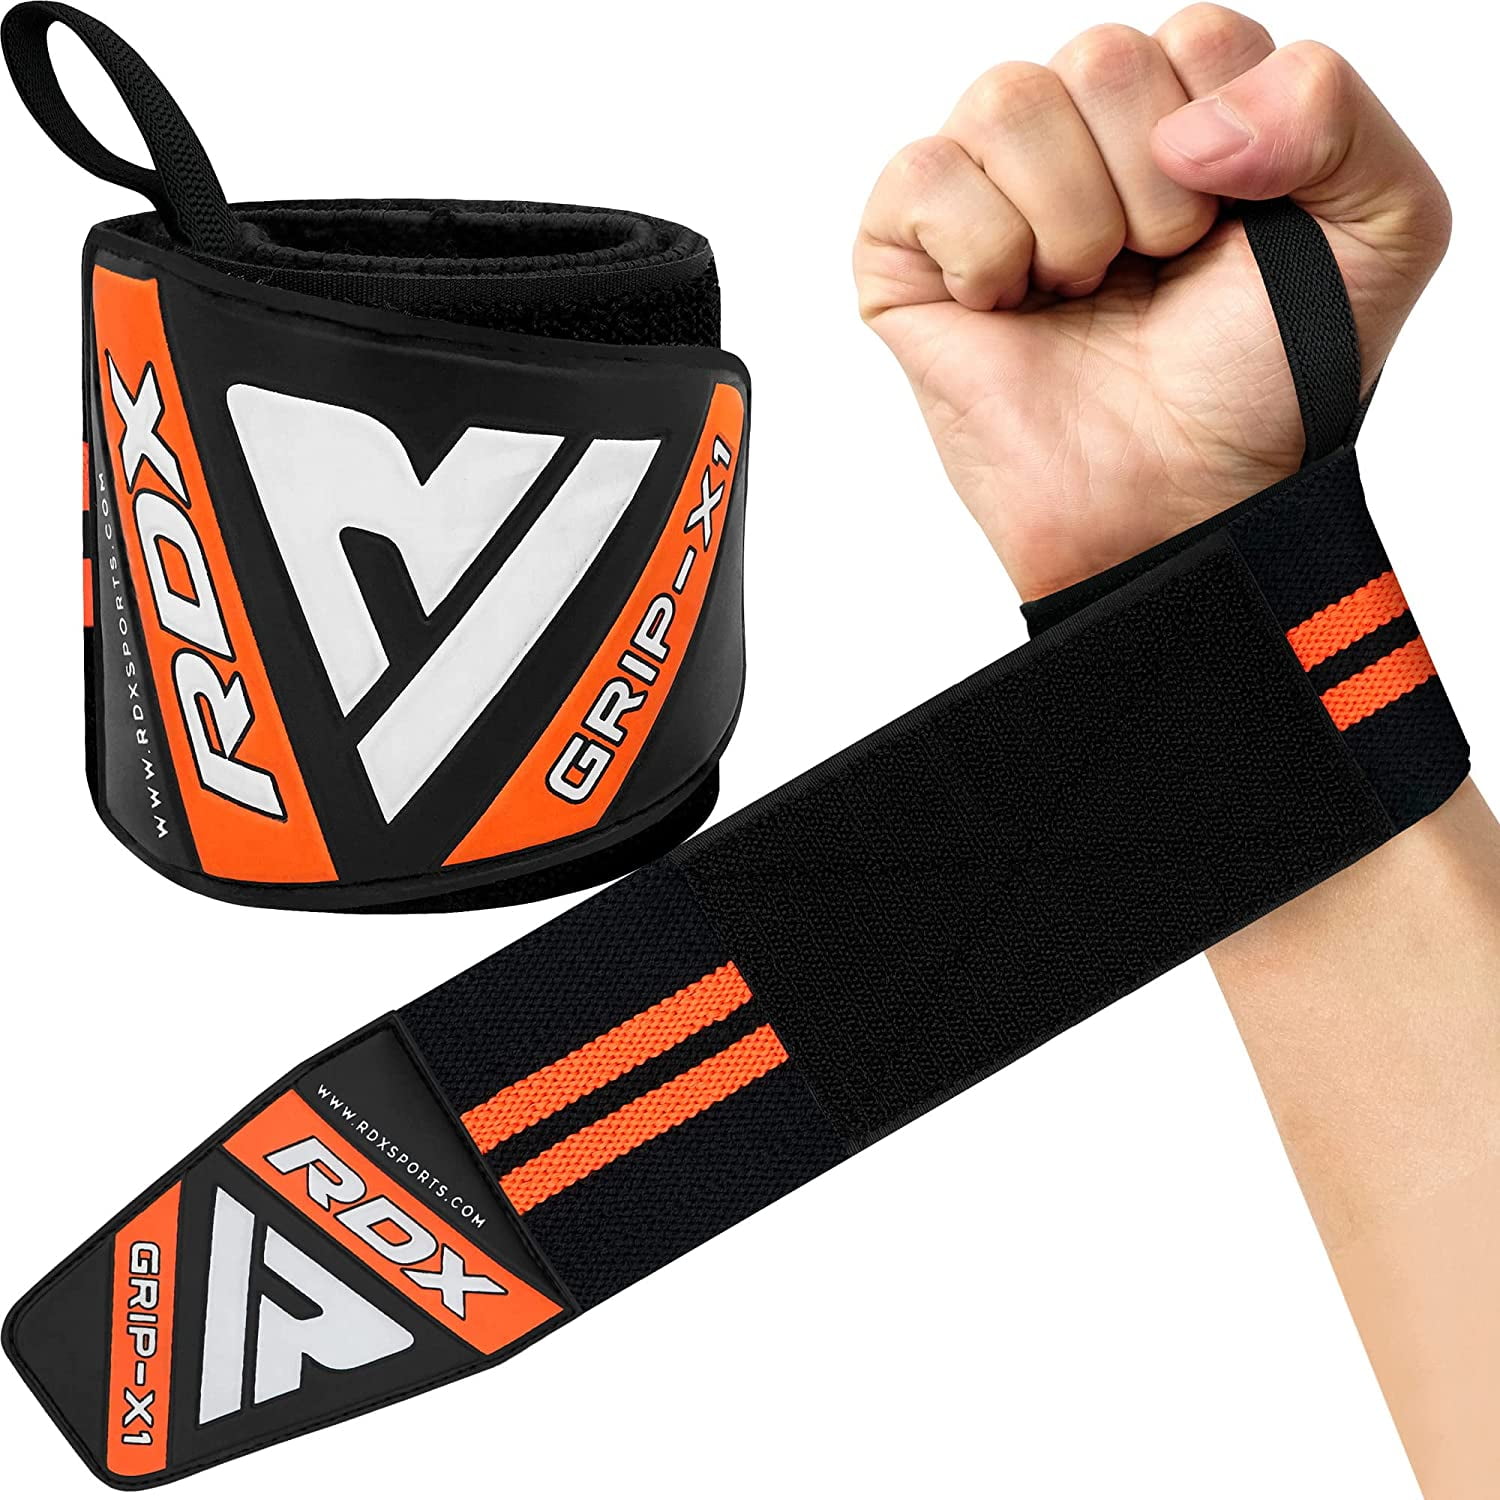 THE ULTIMATE LIFTING SUPPORTERS PAIR WEIGHTLIFTING HOOK WRIST SUPPORT LIFTUPS™ 